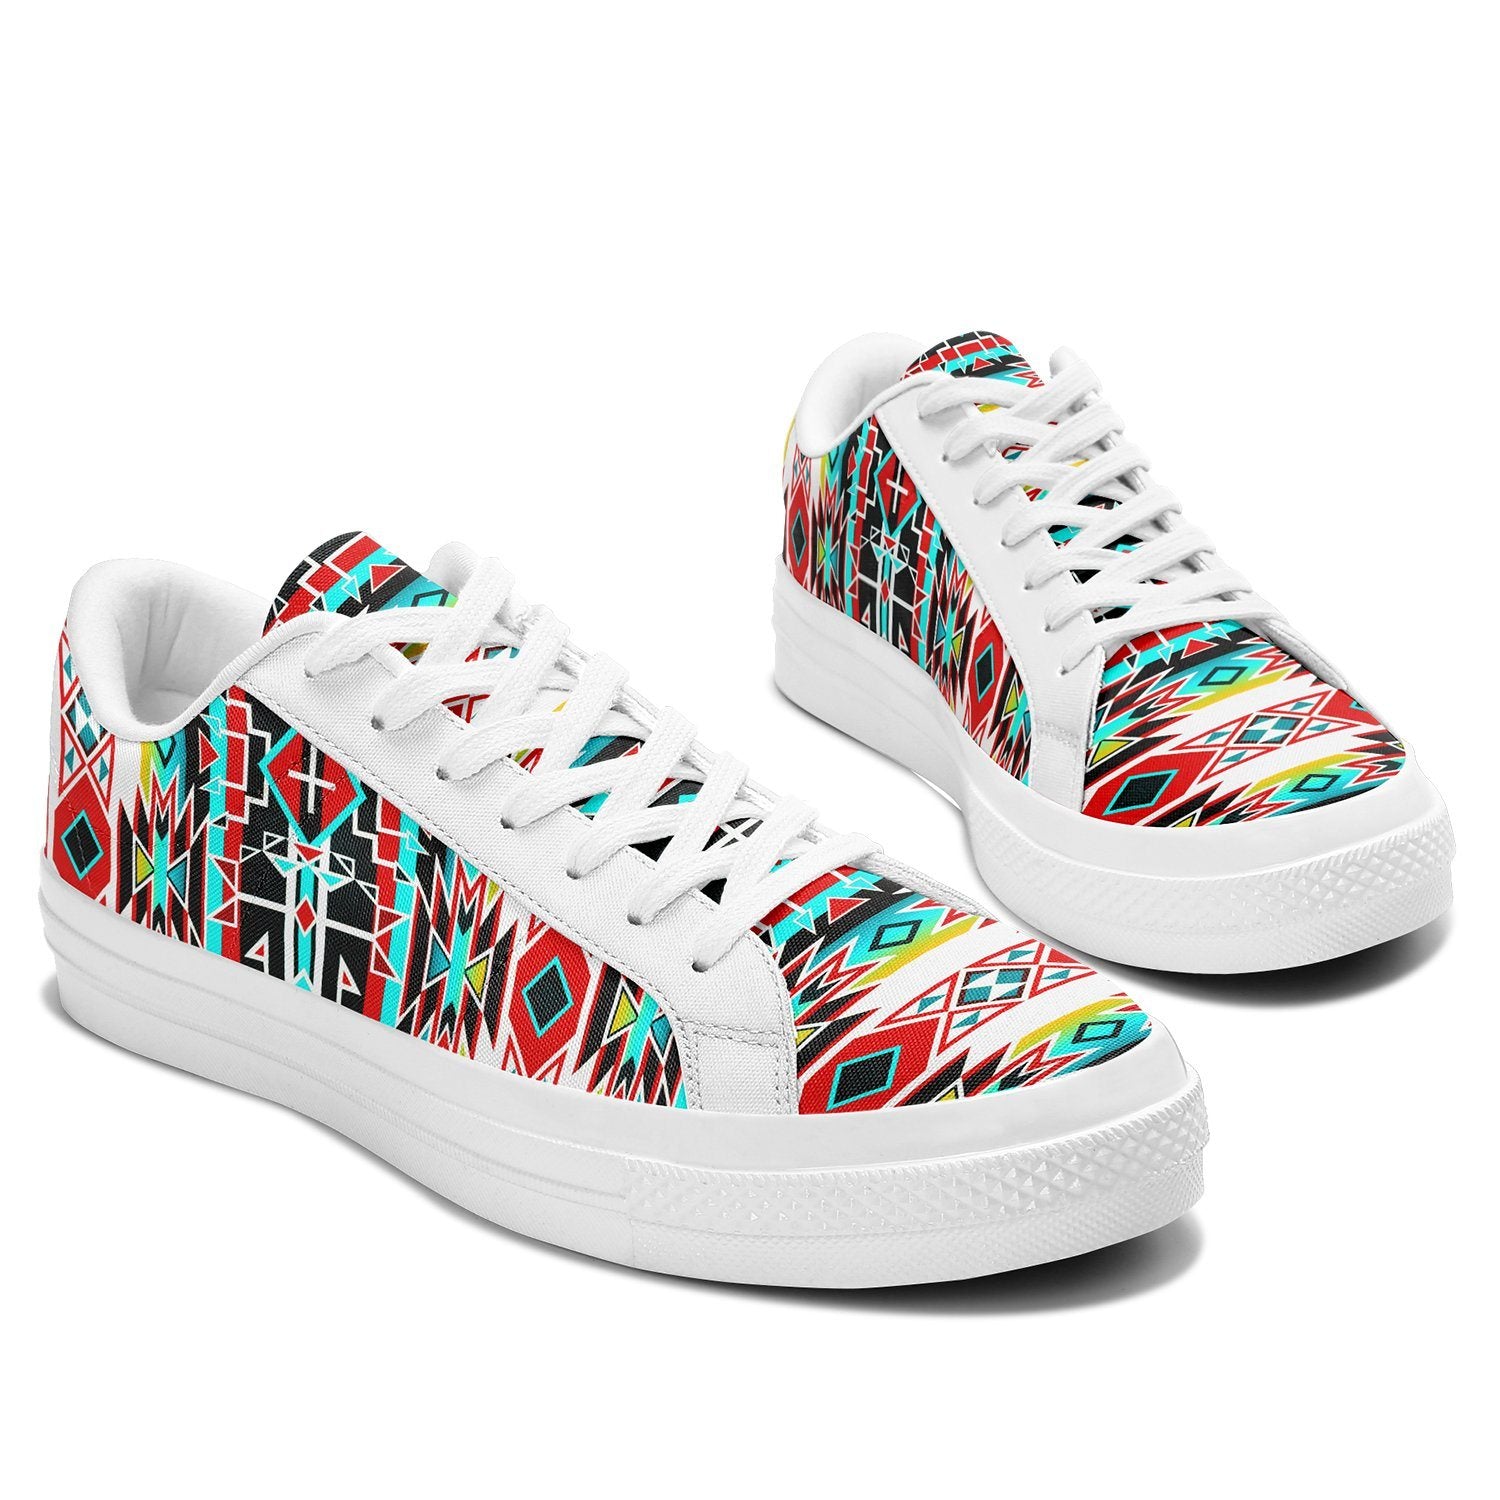 Force of Nature Windstorm Aapisi Low Top Canvas Shoes White Sole 49 Dzine 